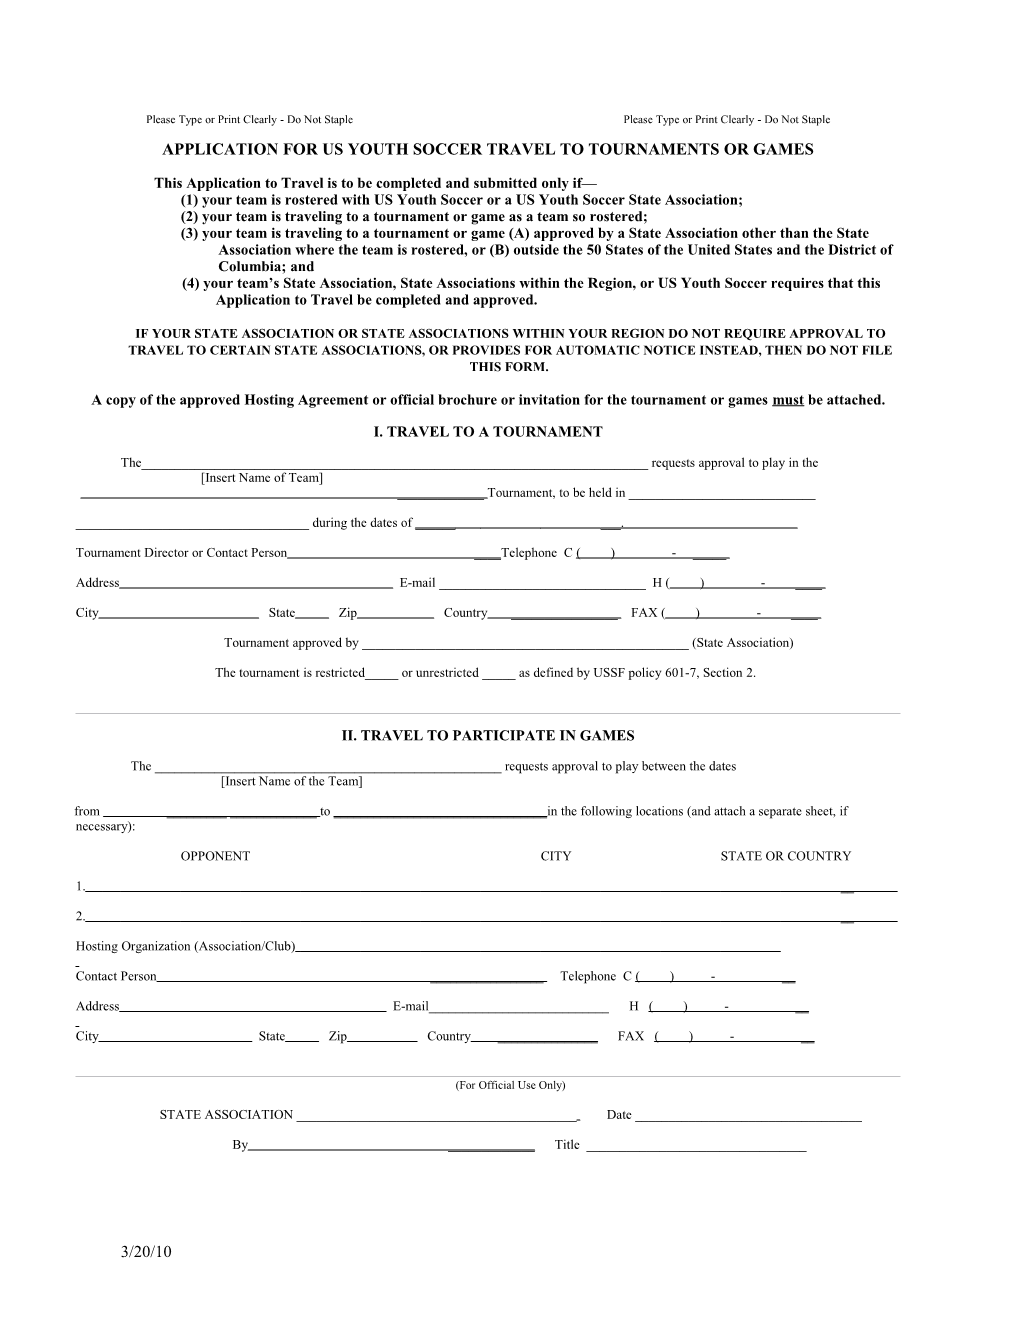 Application for Us Youth Soccer Travel to Tournaments Or Games